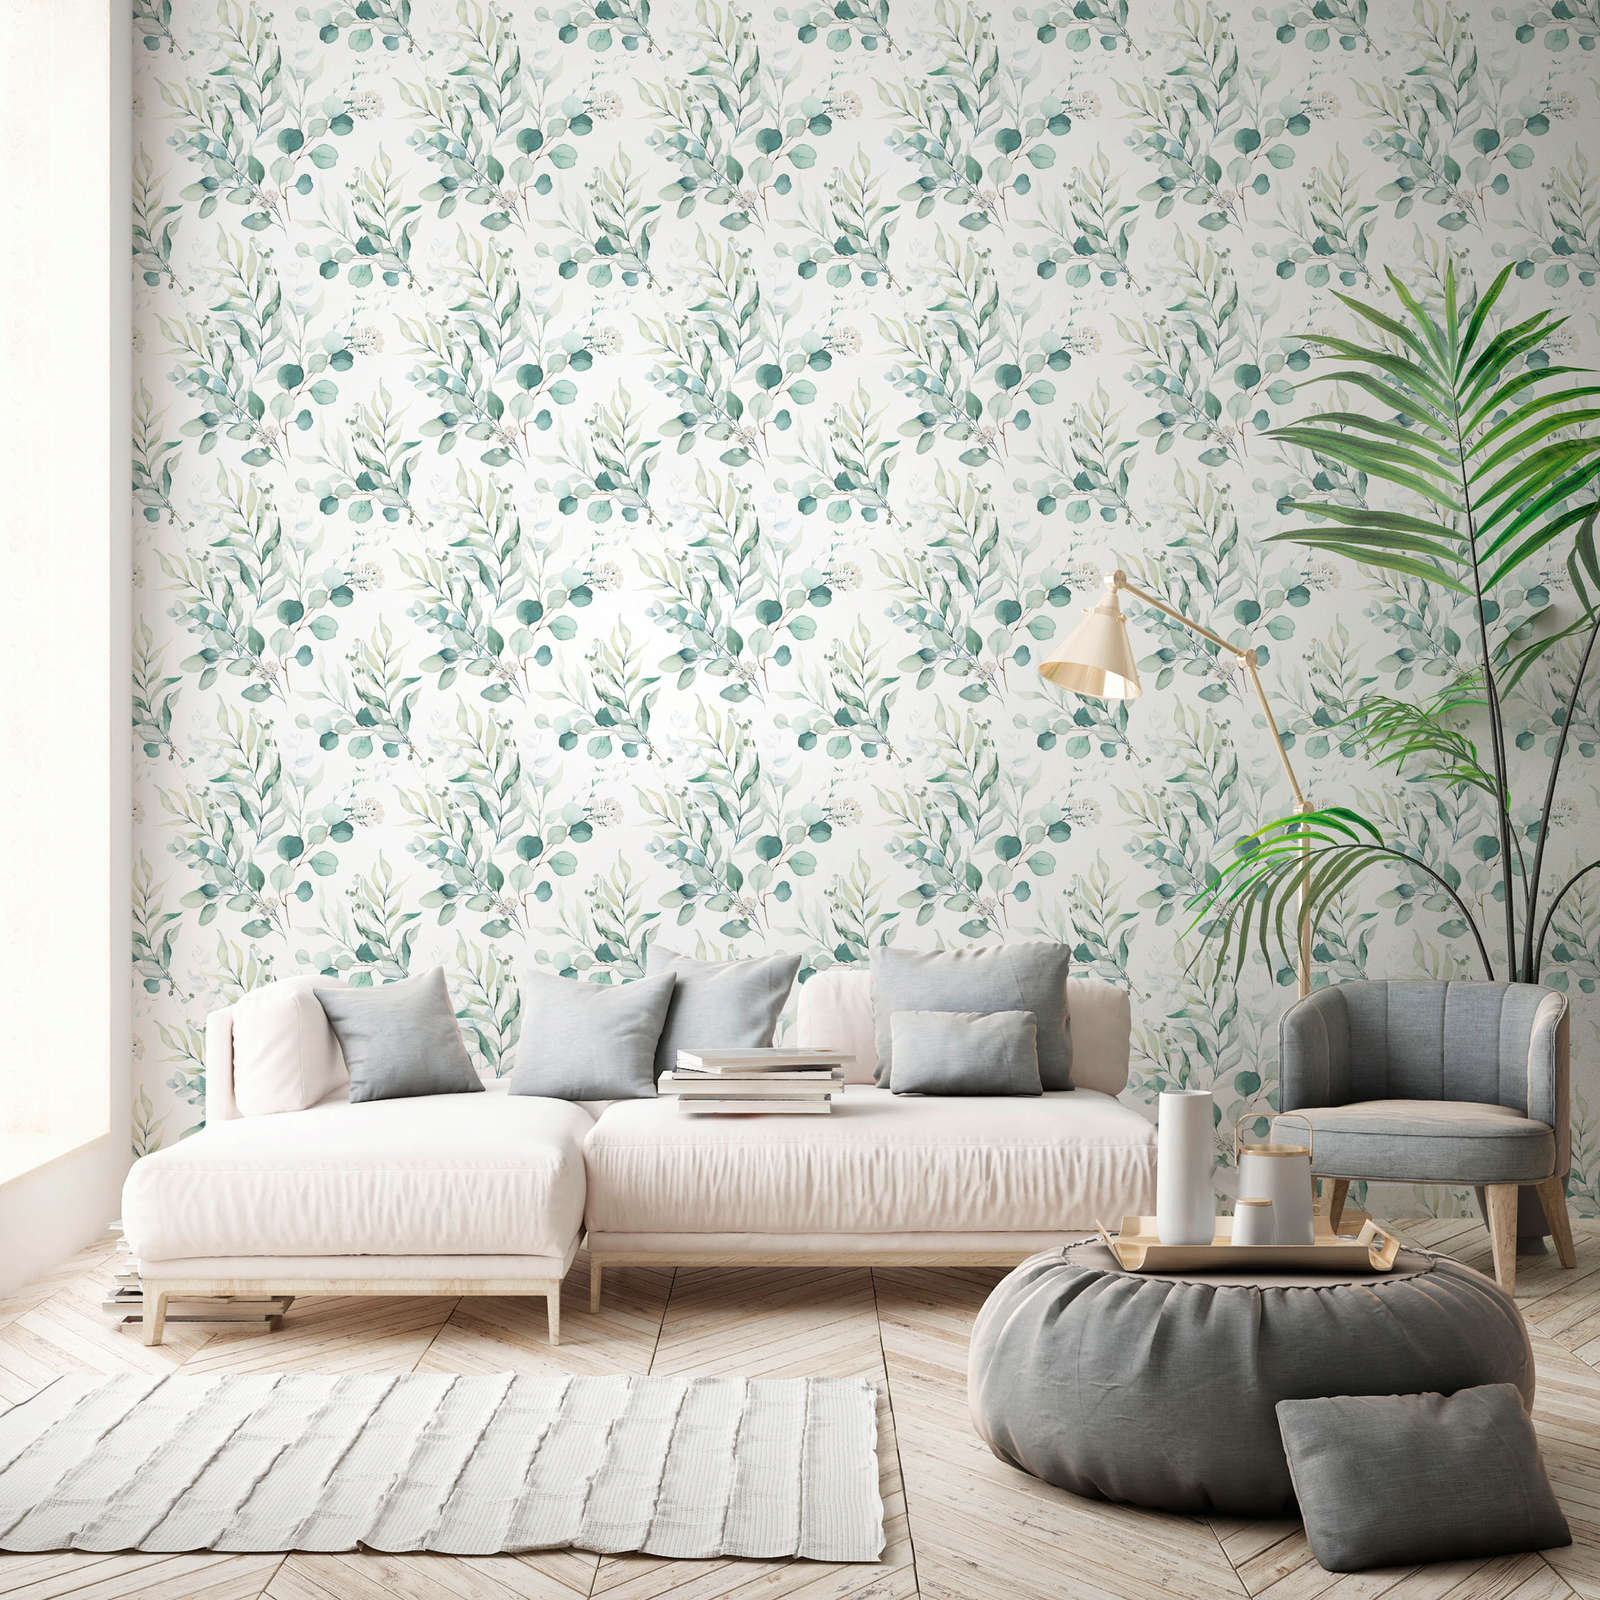             Non-woven wallpaper with watercolour leaf pattern - cream, green
        